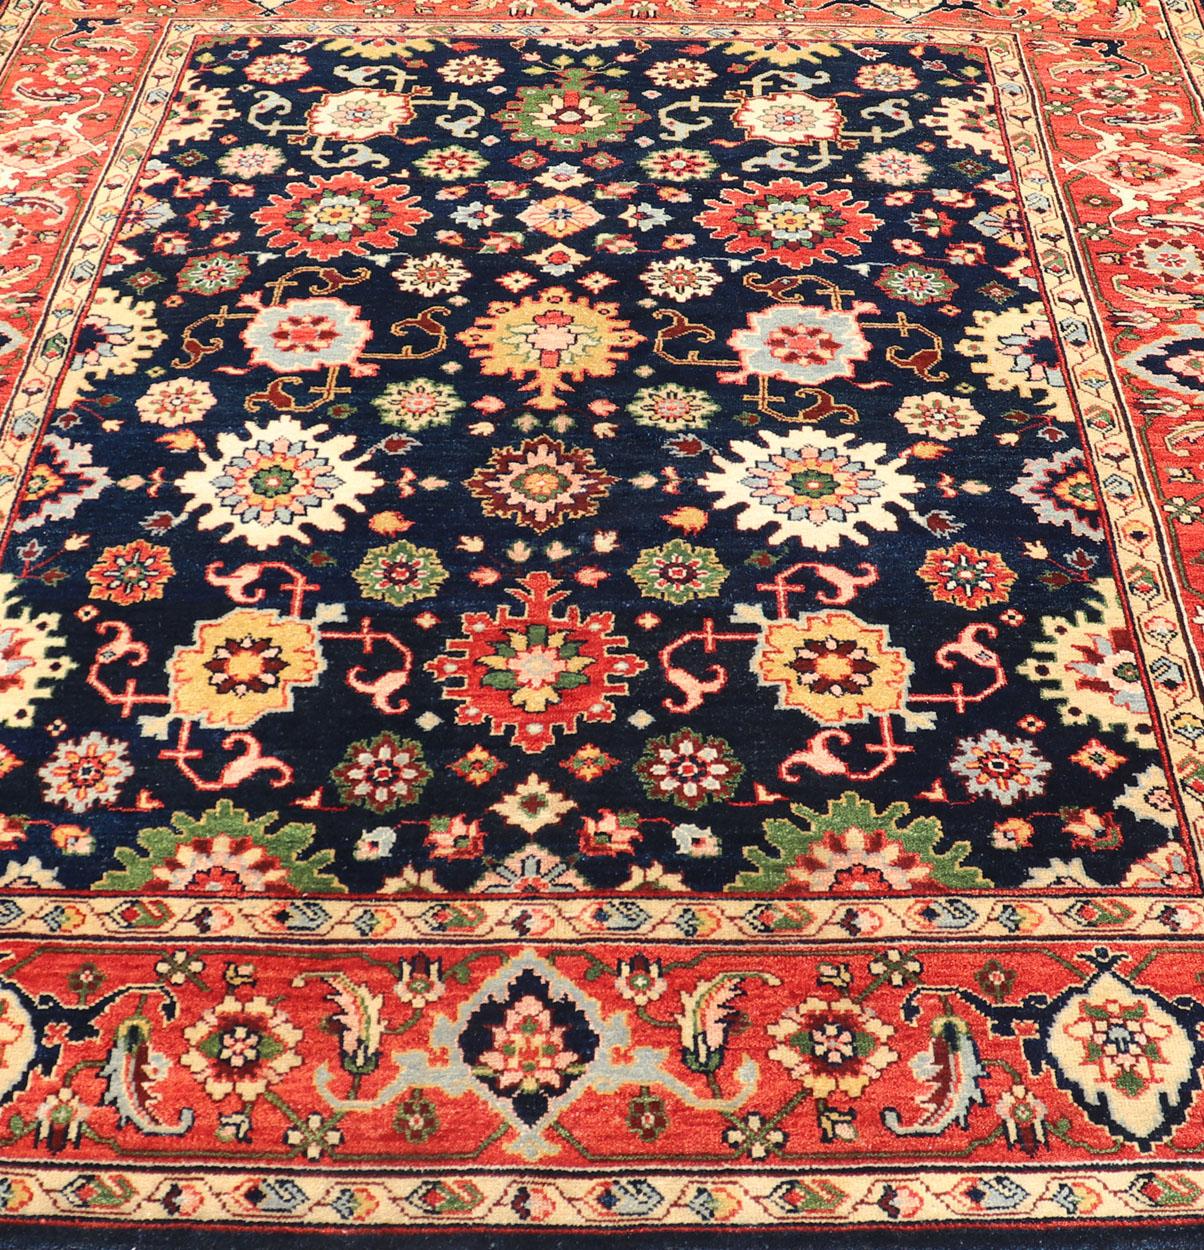 Keivan Woven Arts Sultanabad-Mahal Design in All-Over Floral Hand-Knotted Carpet For Sale 9